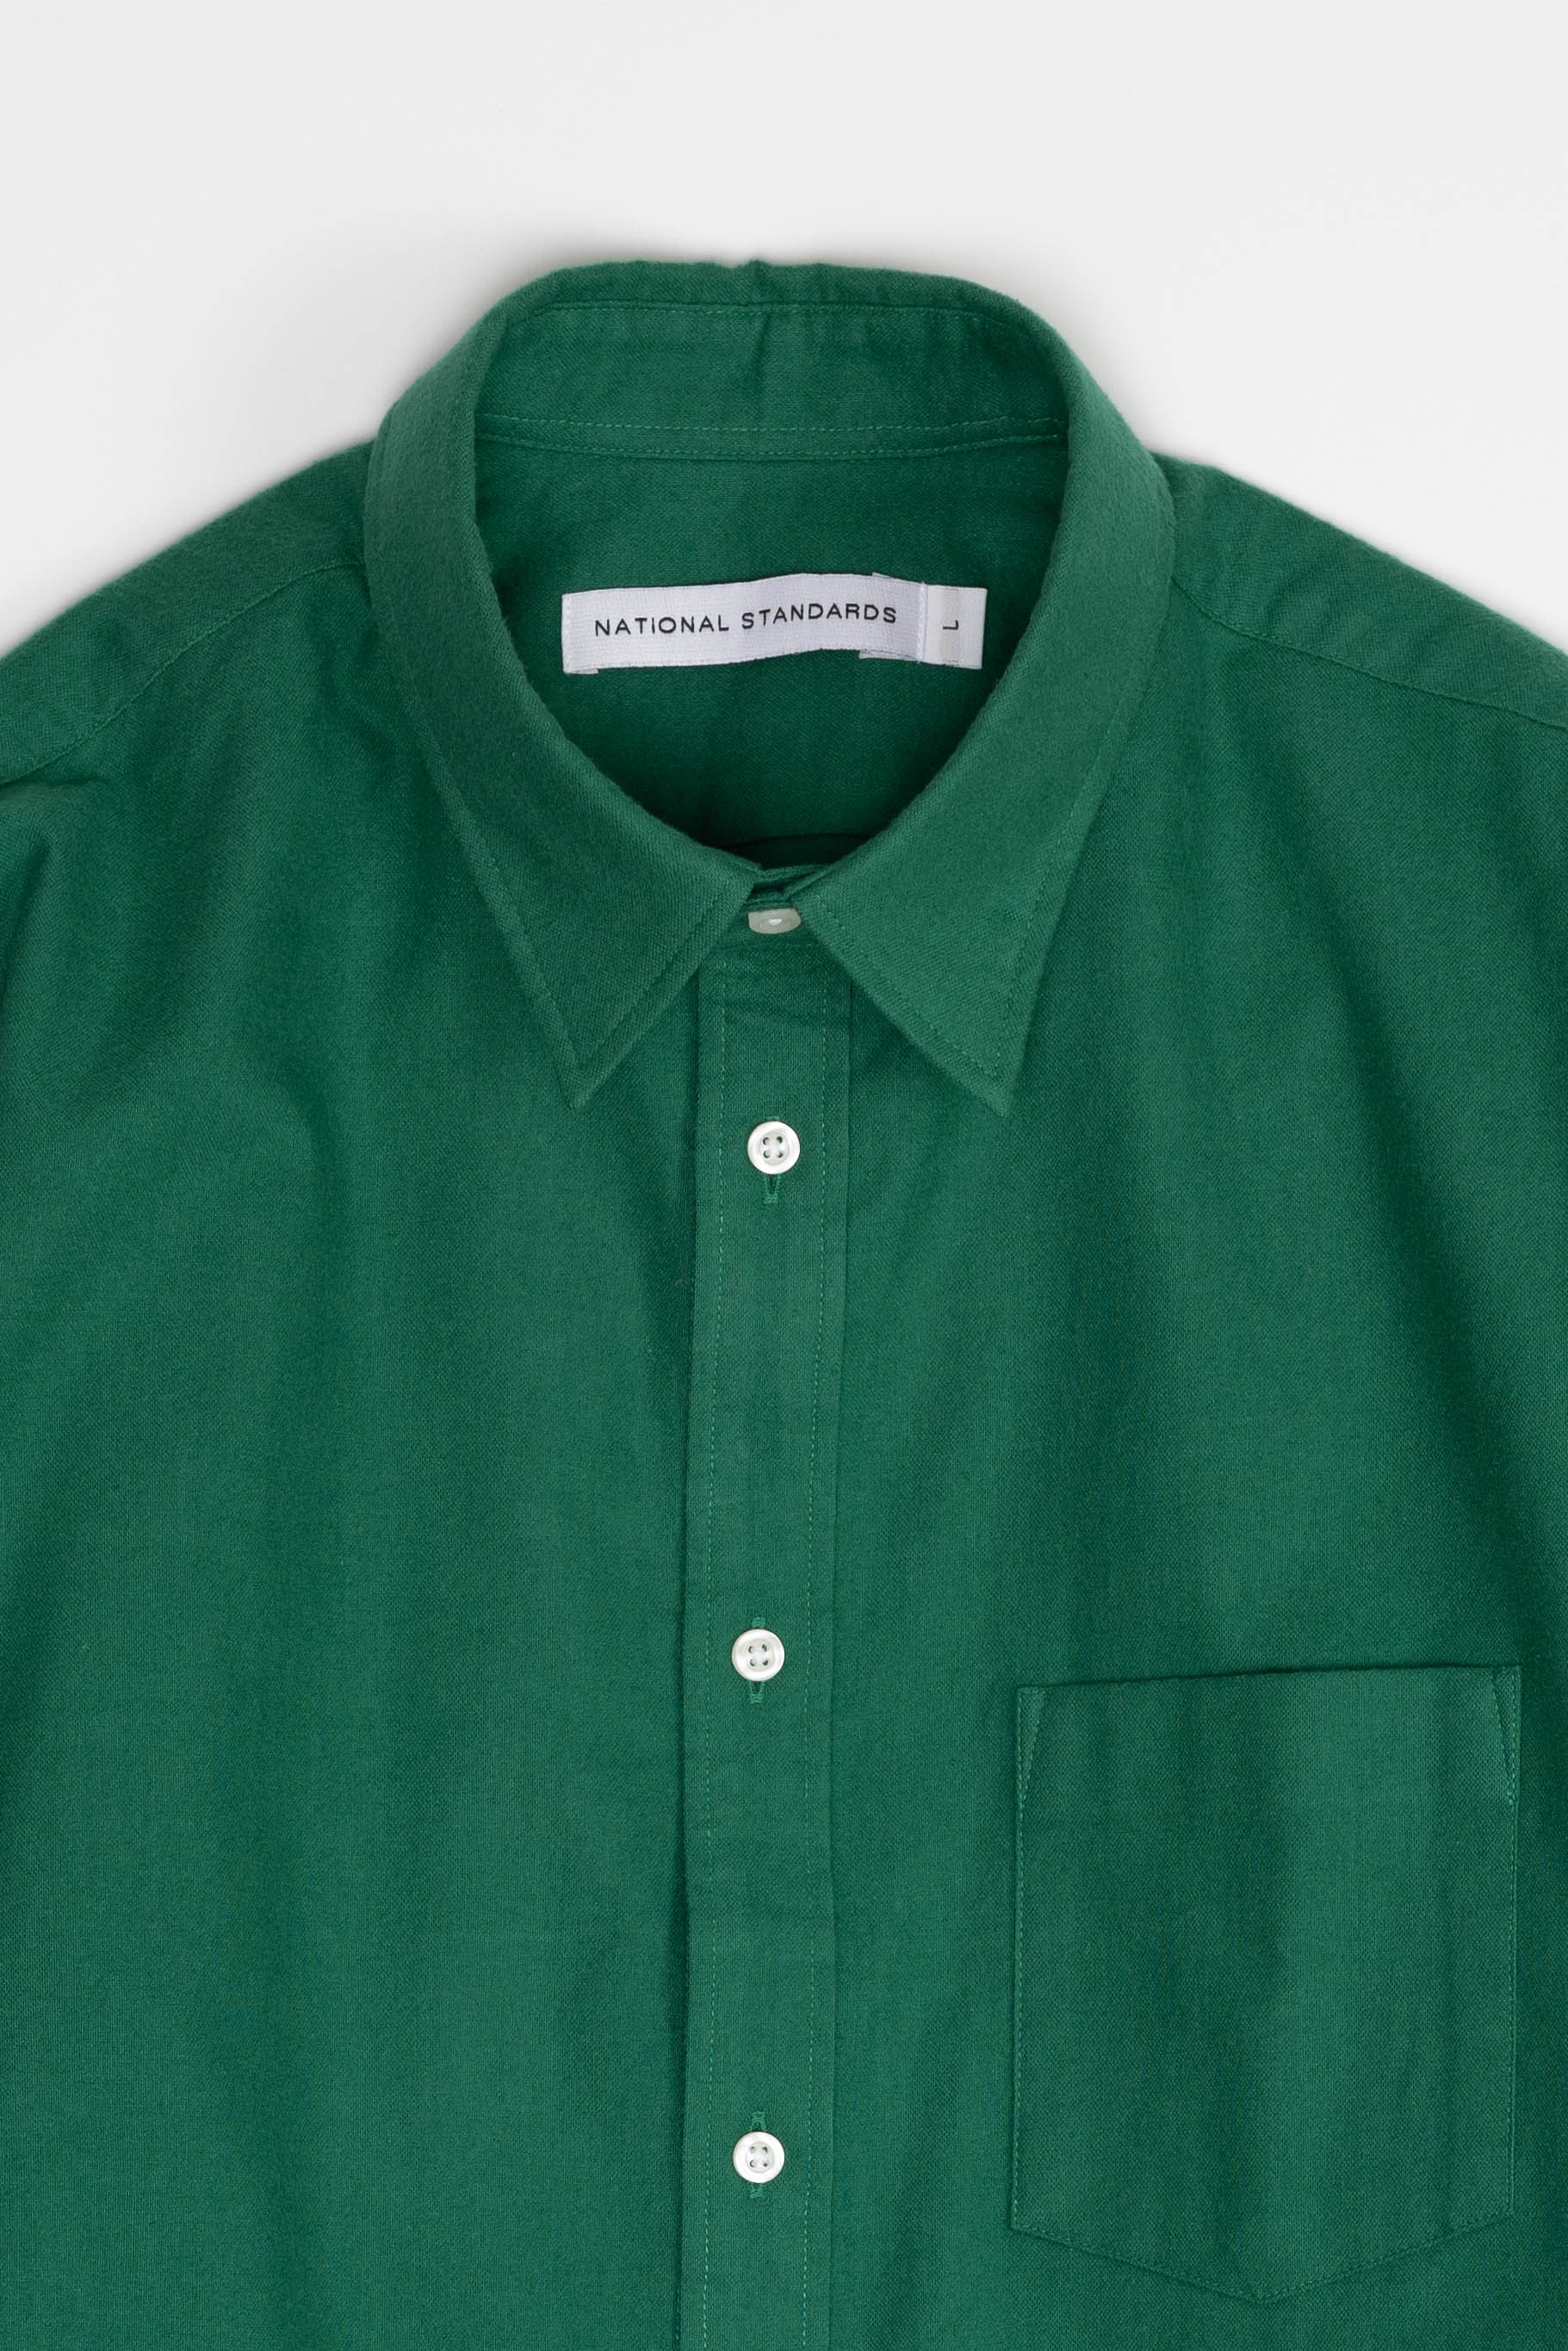 Japanese Flannel in Green 05